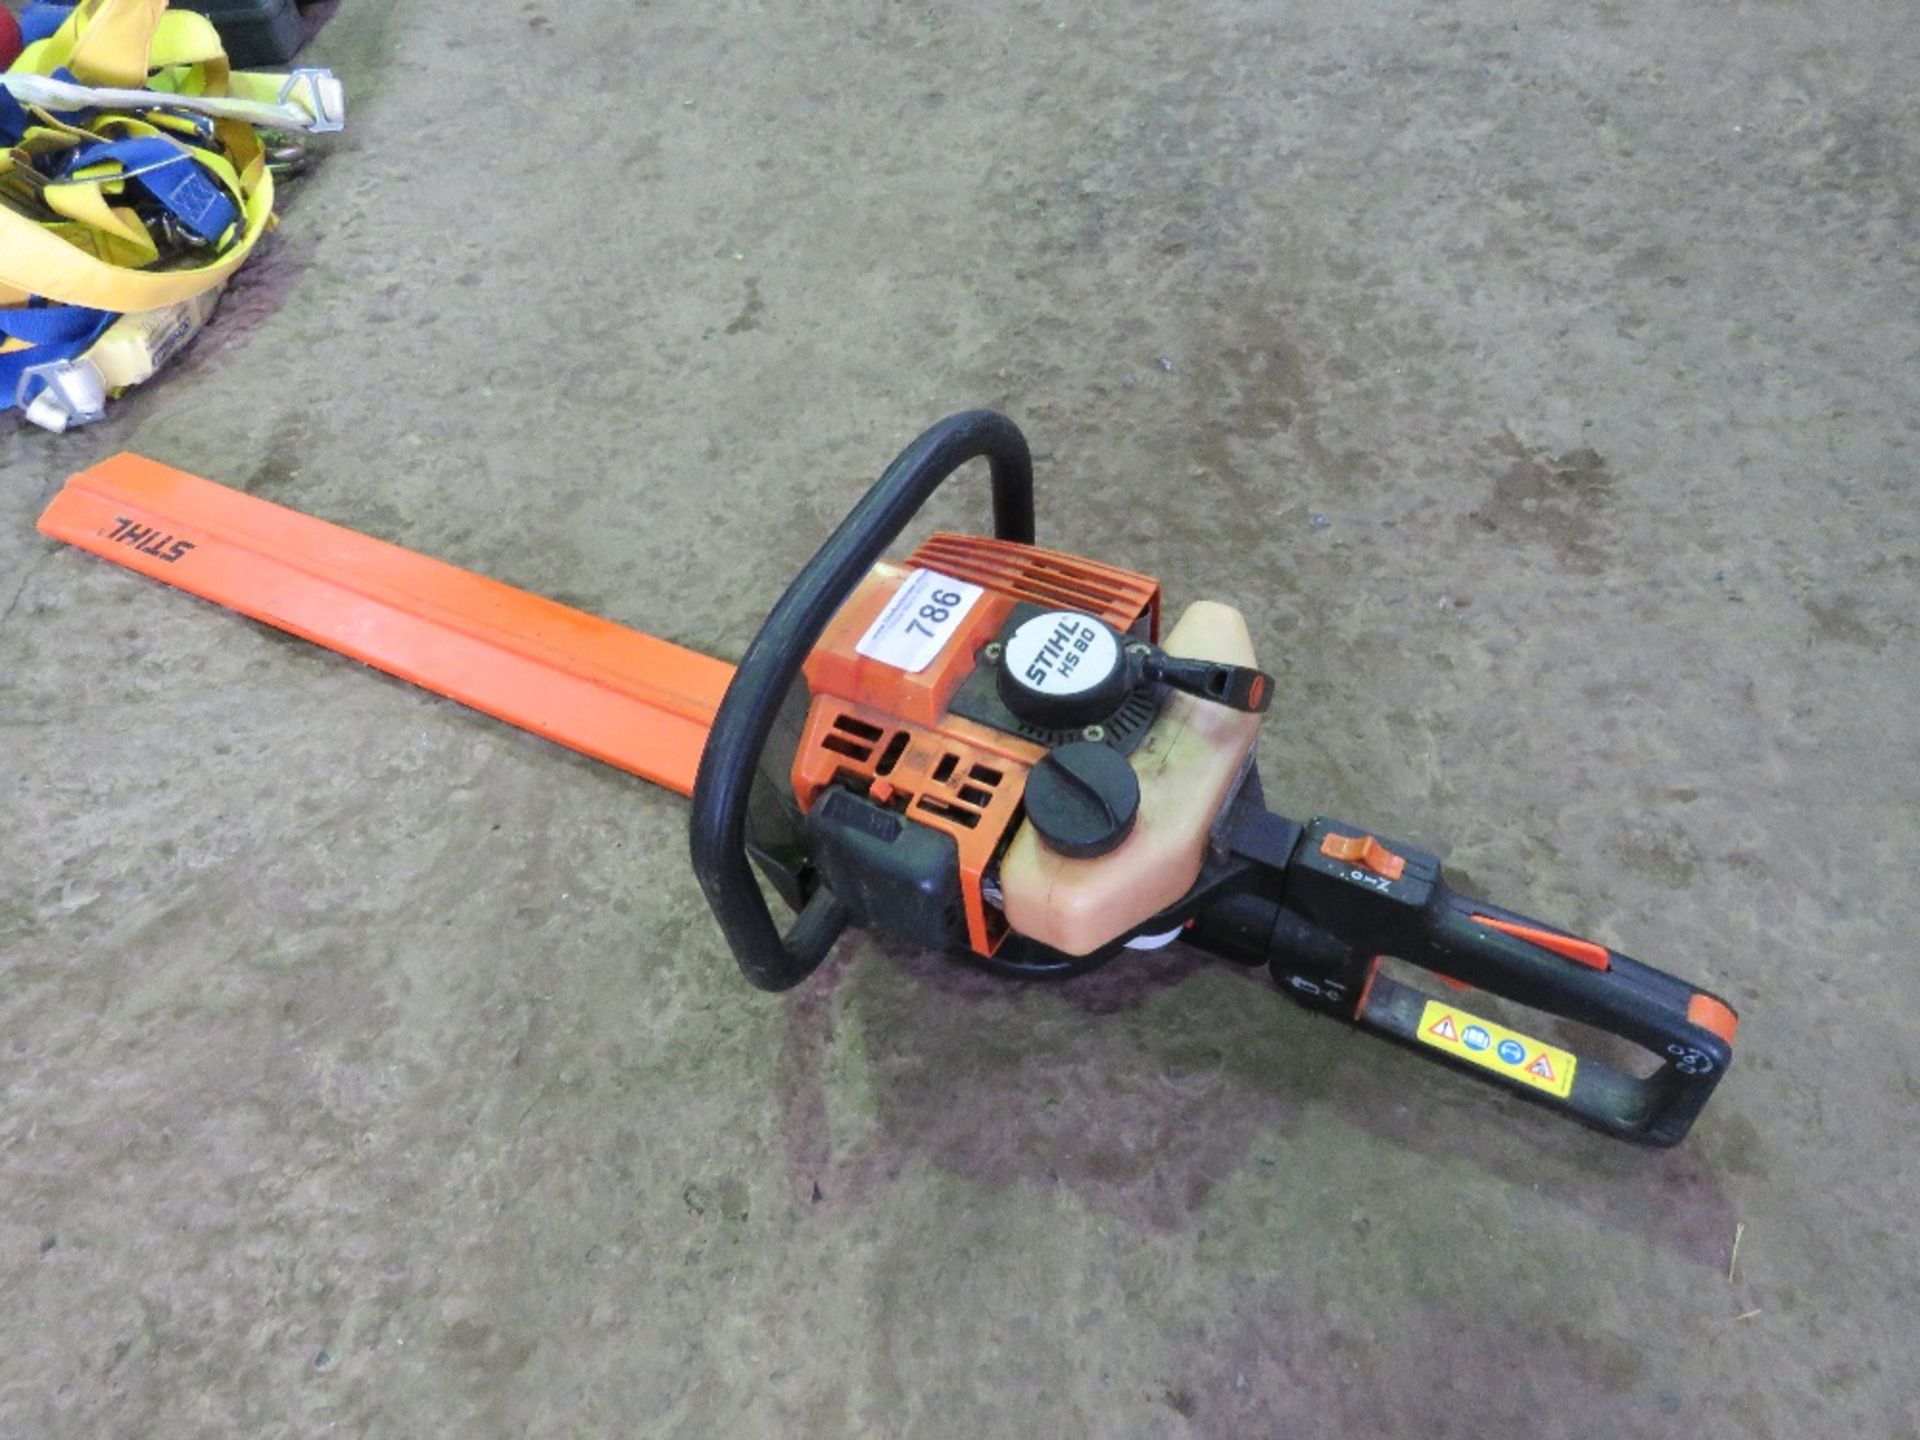 STIHL HS80 PETROL ENGINED HEDGE CUTTER. DIRECT FROM RETIRING BUILDER. THIS LOT IS SOLD UNDE - Bild 4 aus 4